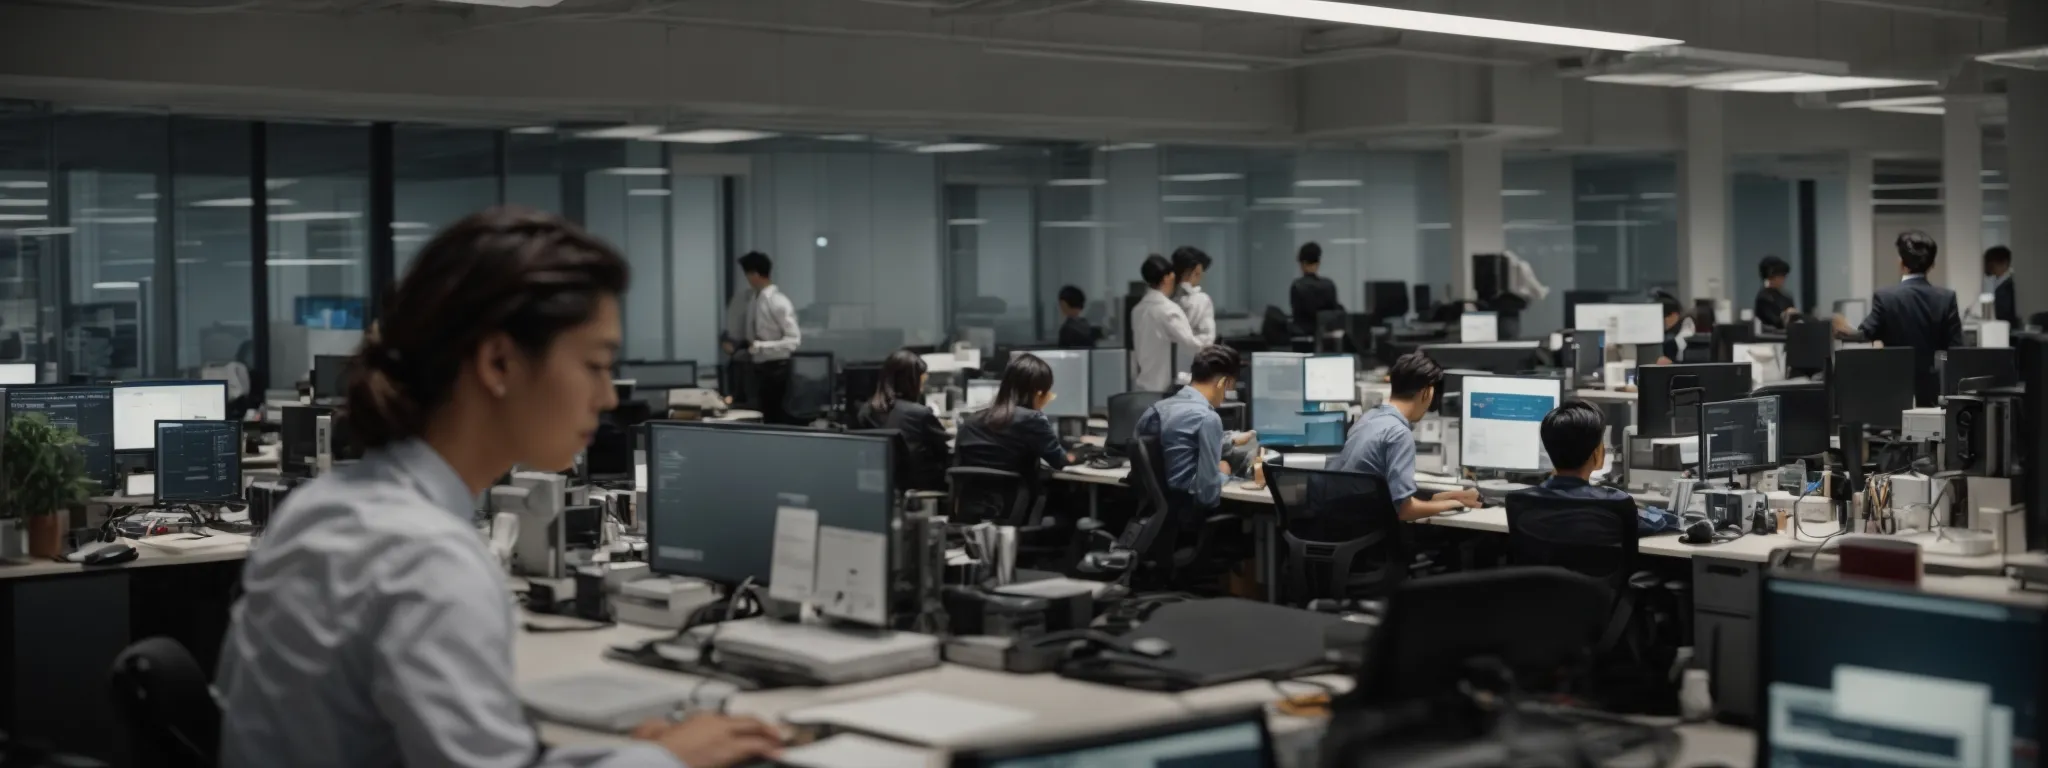 a bustling office with professionals working intently at computers in a modern workspace.